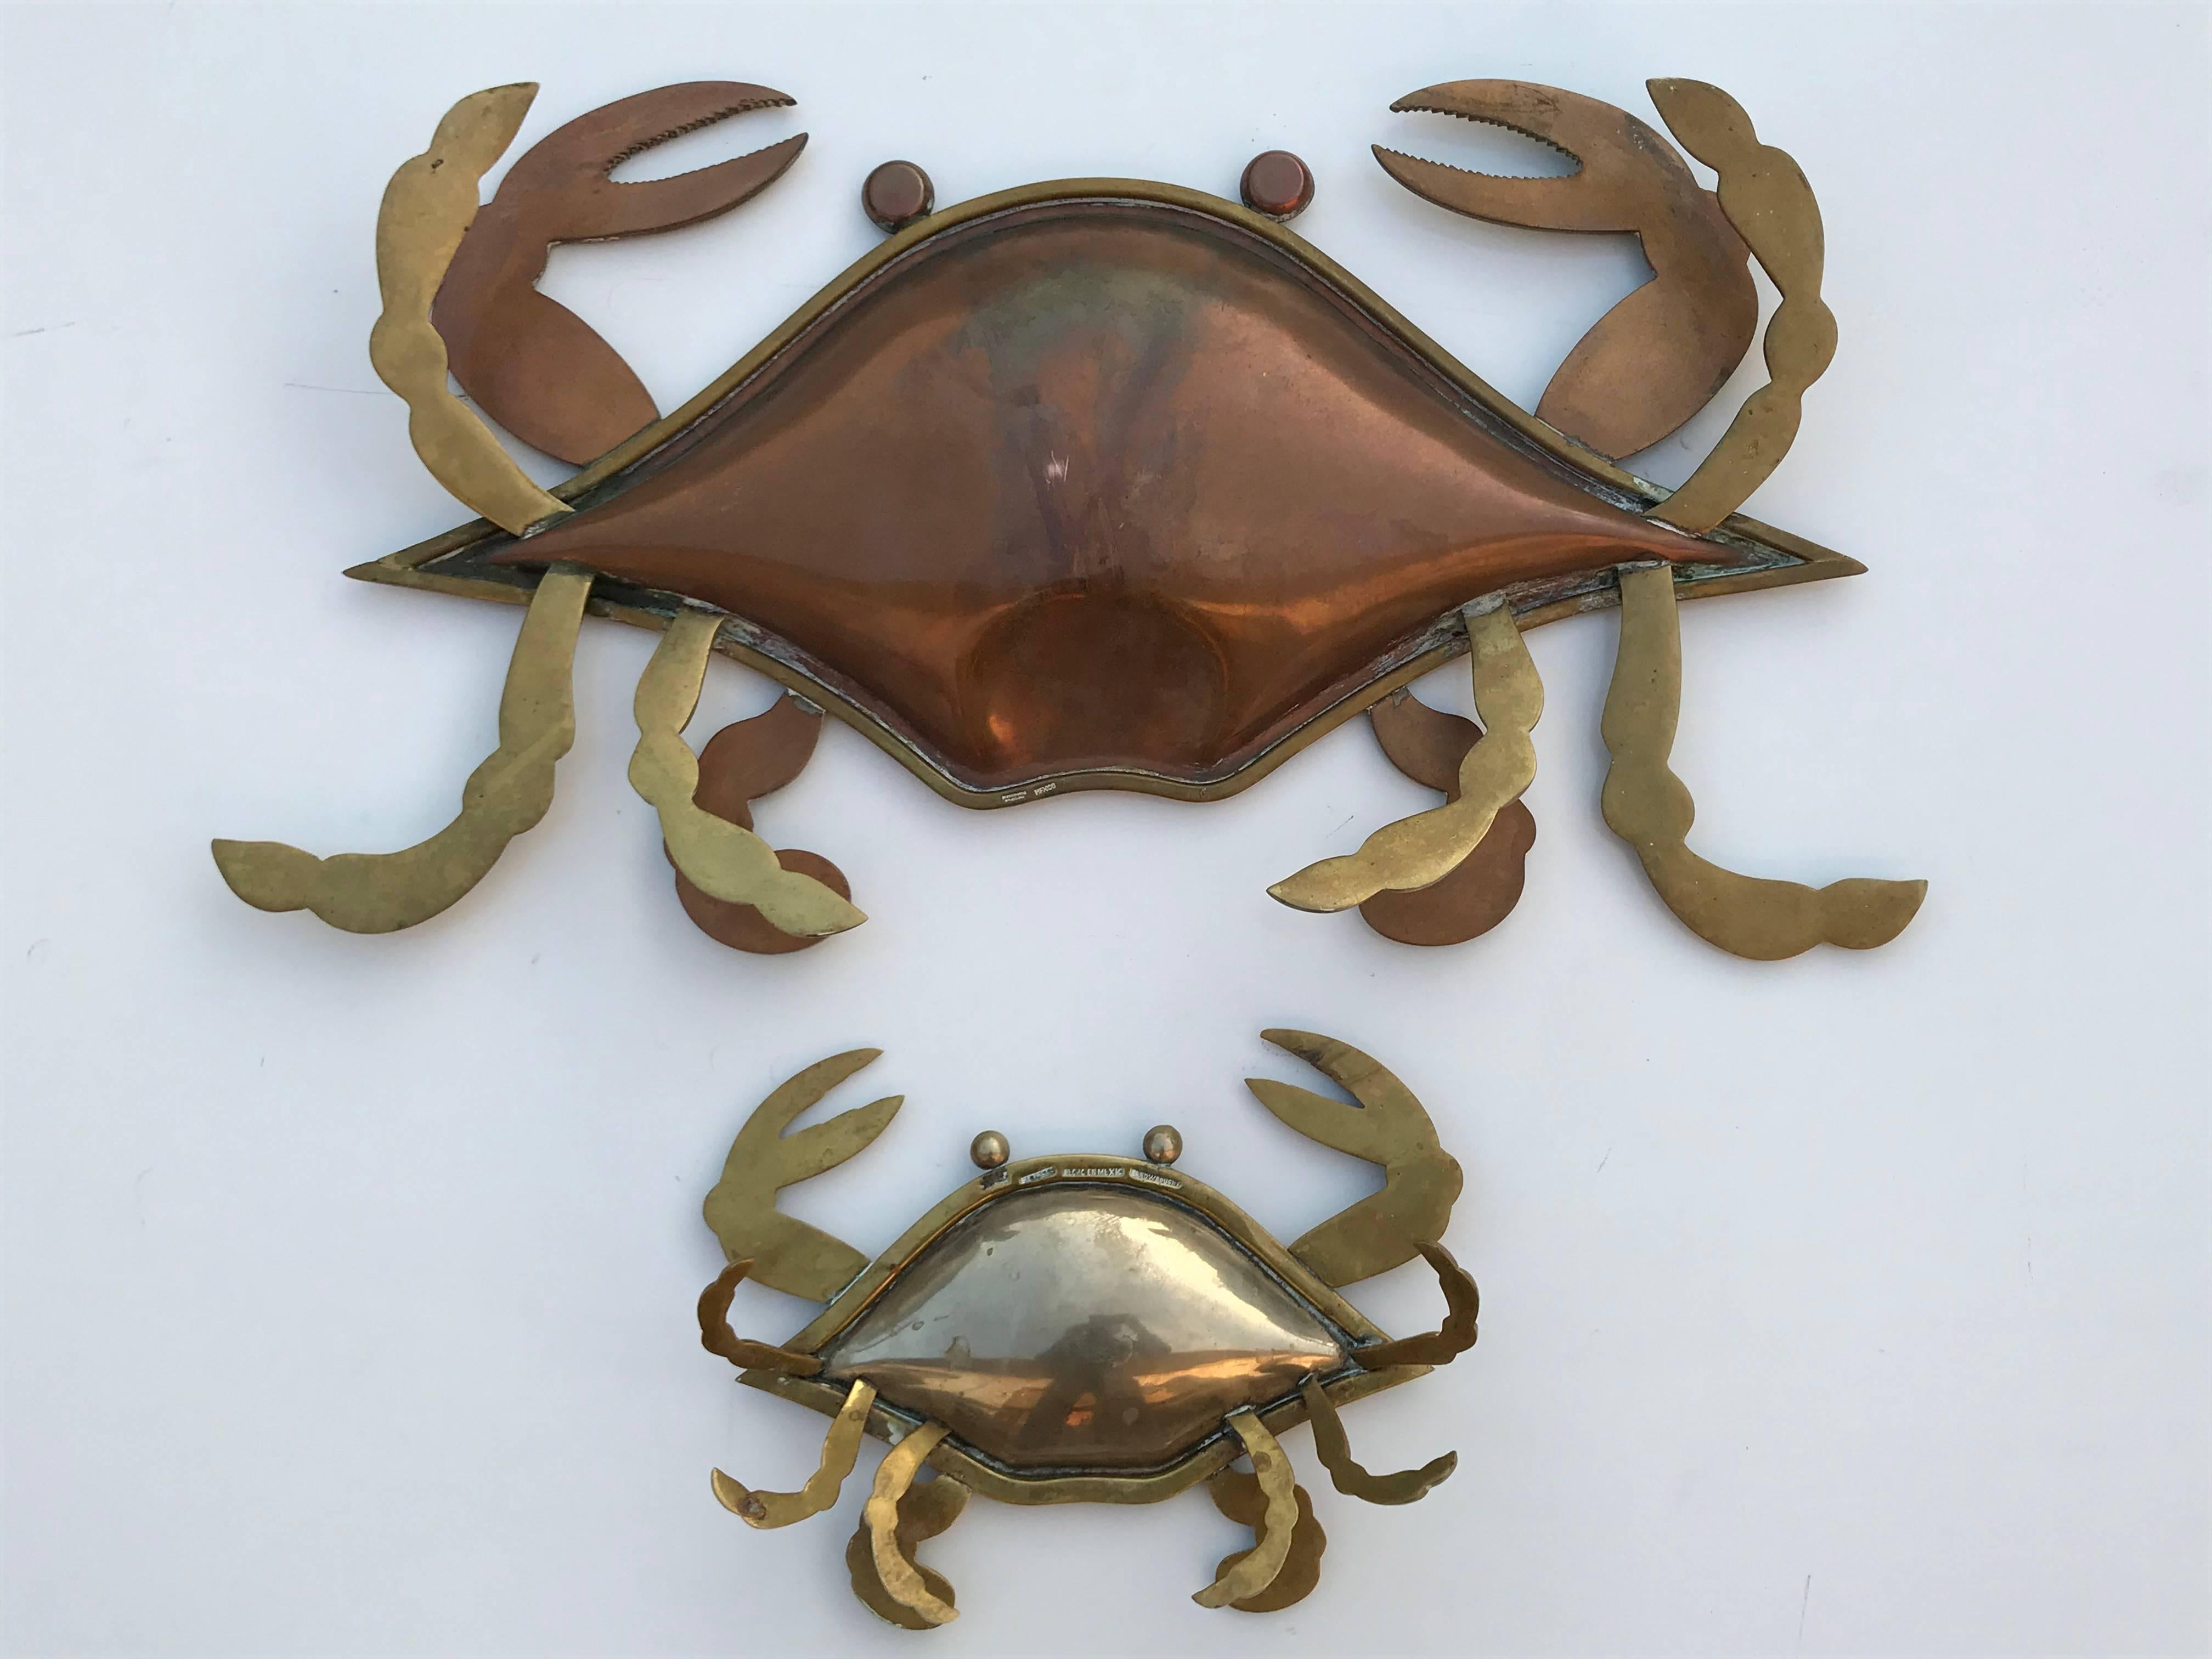 Brass crab mother and baby sculpture or platter attributed to Los Castillos
Measures: Small crab is 9.5 inches wide, 7 inches deep and 2 inches high.